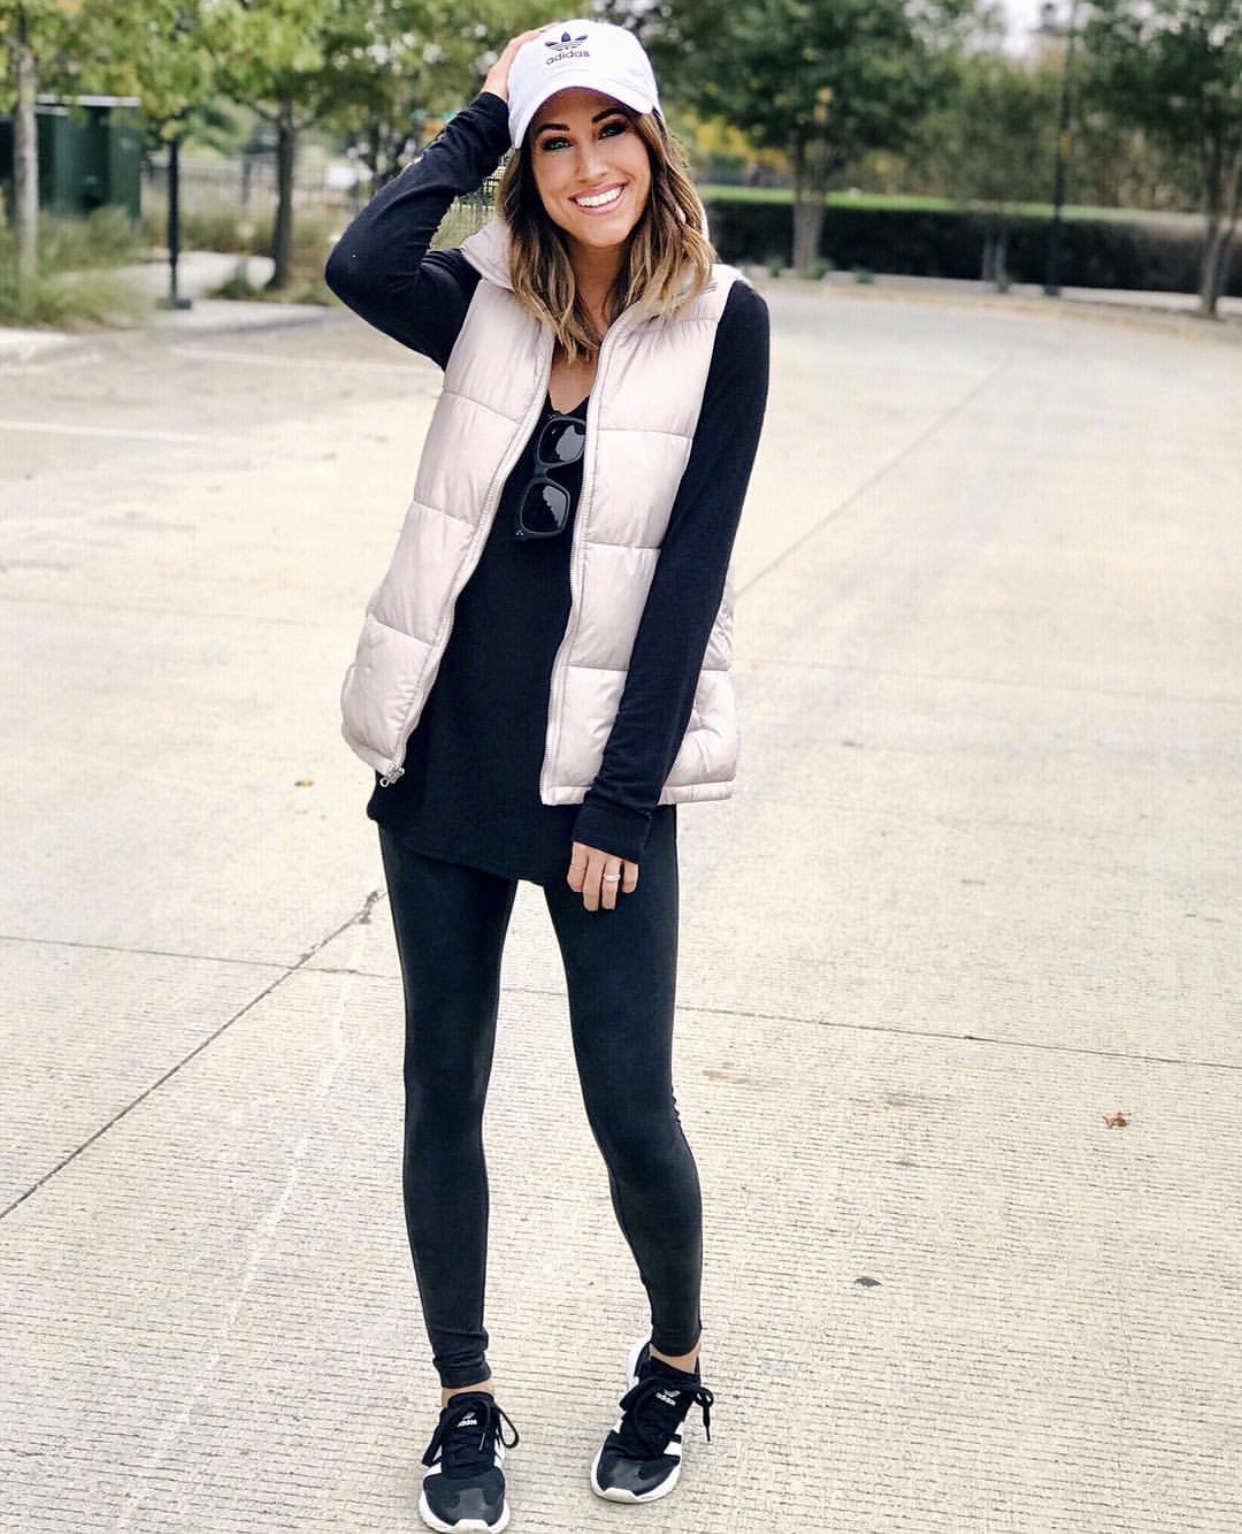 Cute ways to style our velocity leggings